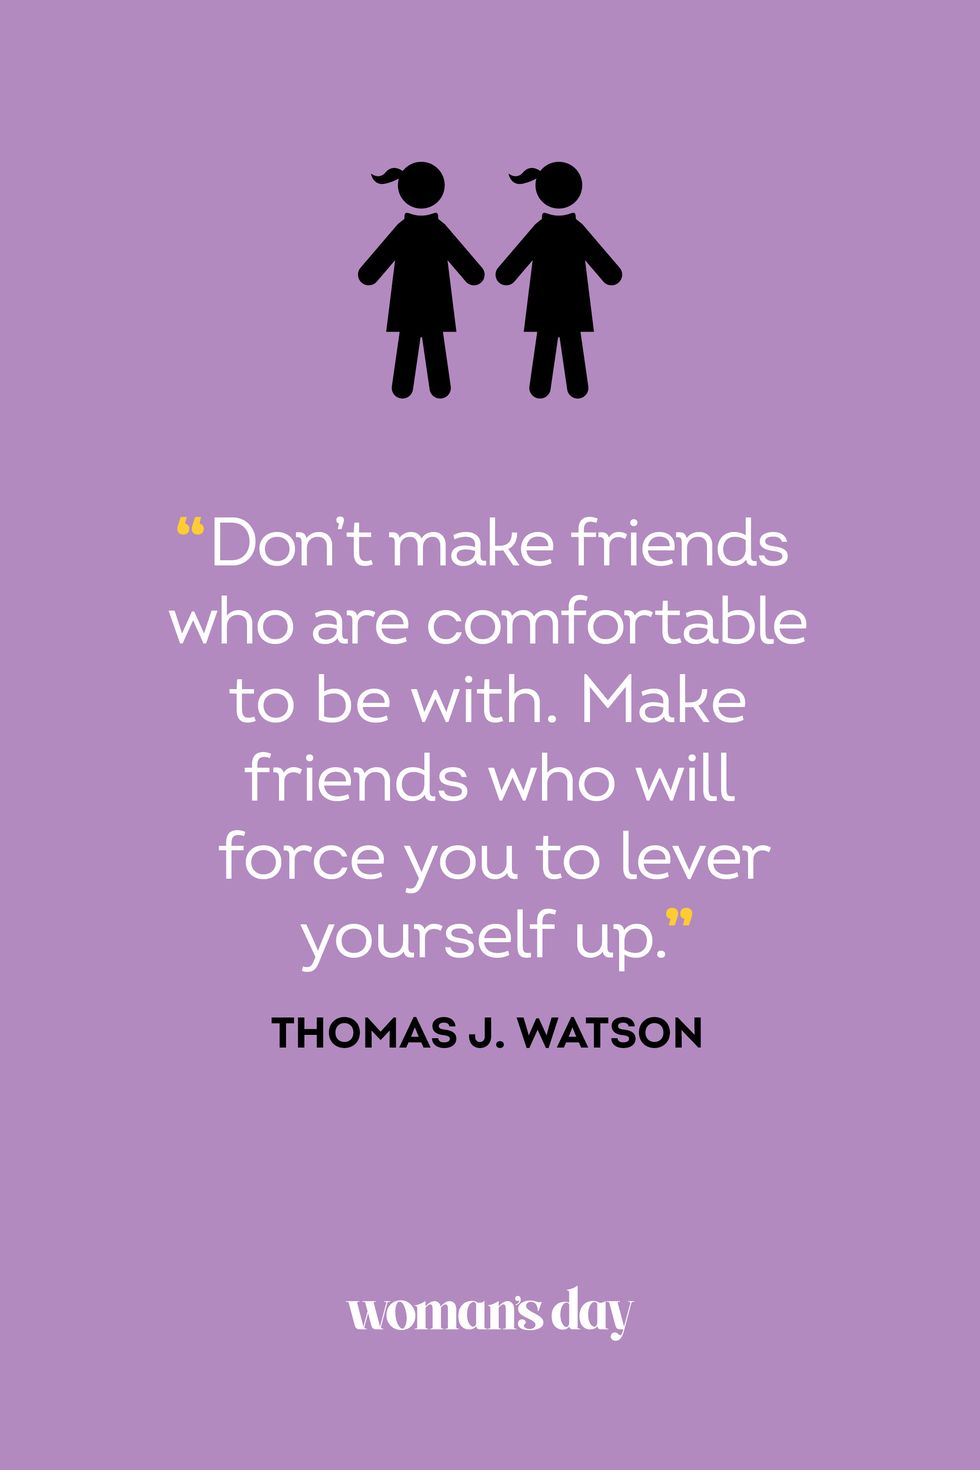 100 Best Friend Quotes to Share With Your Person